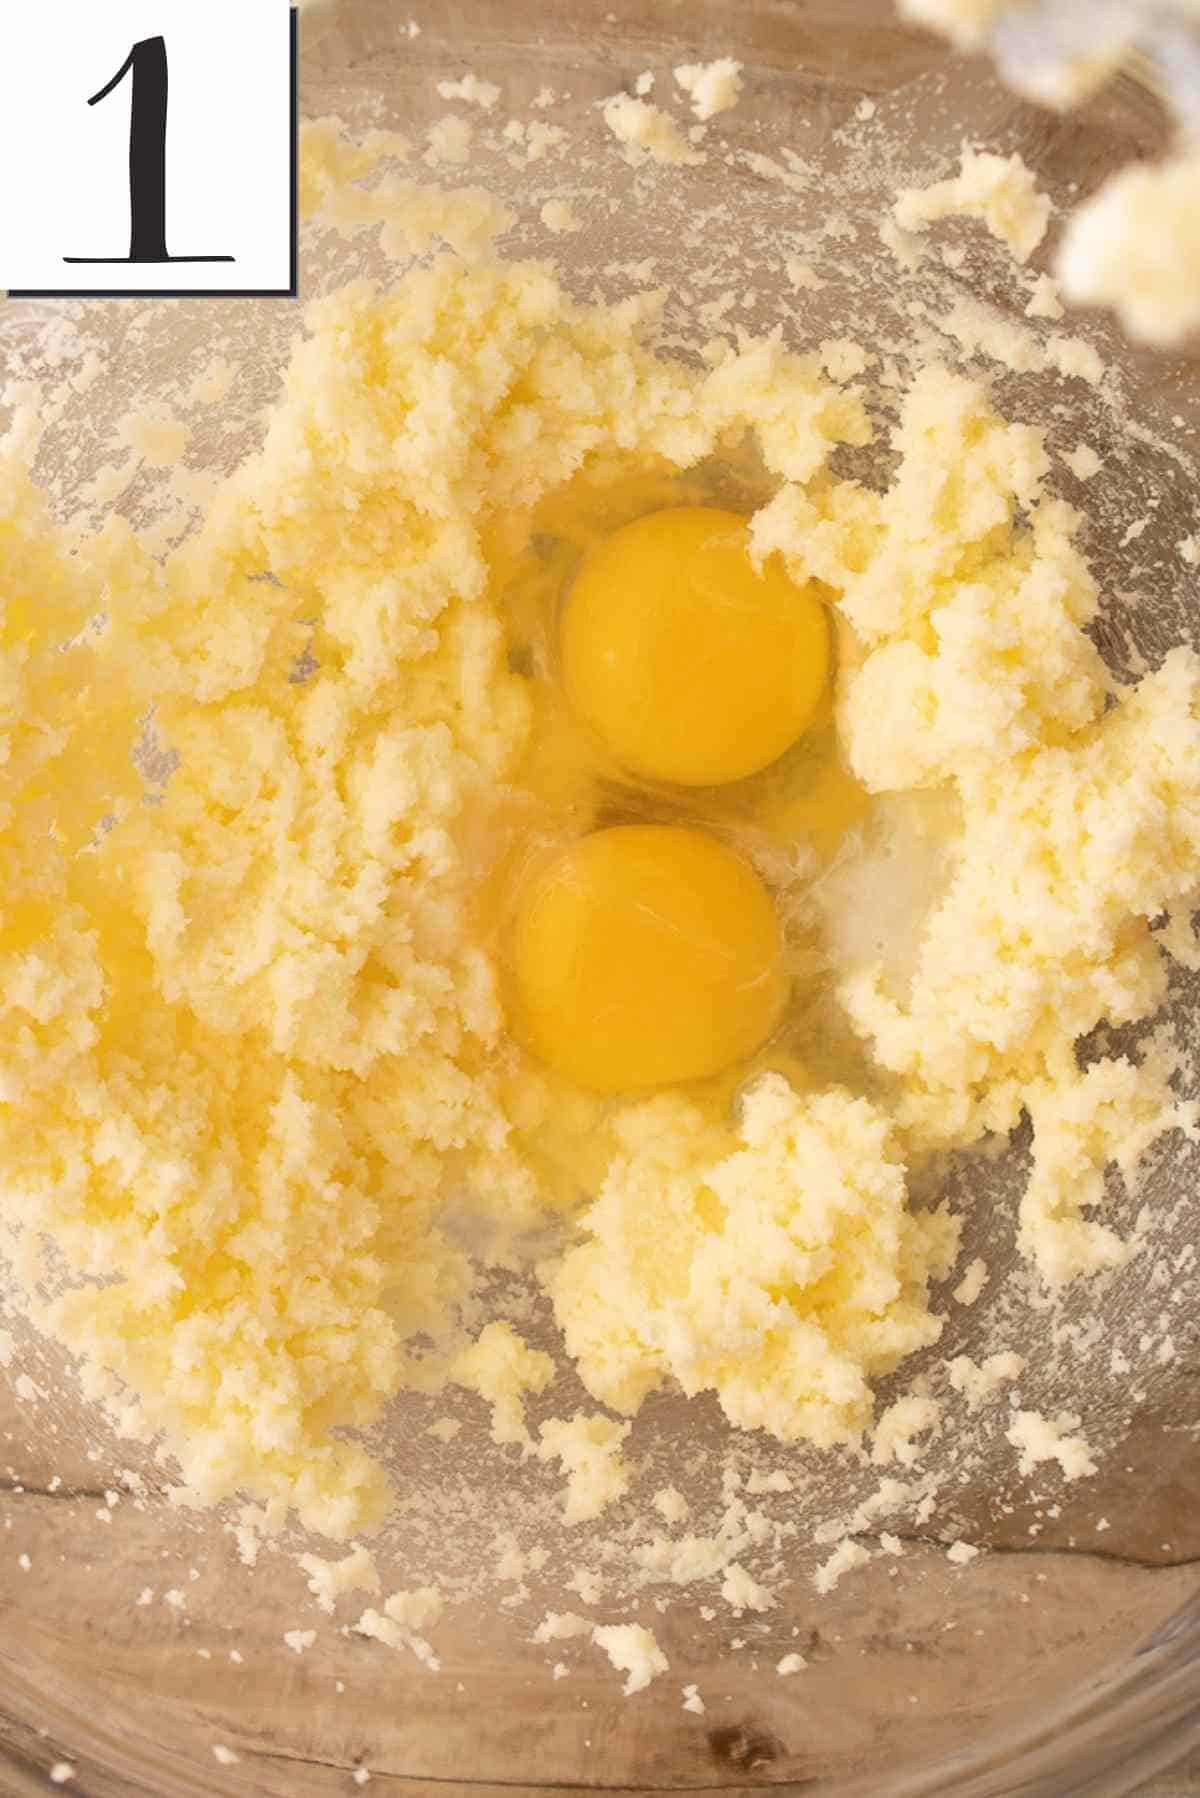 Eggs cracked into the bowl with creamed butter and sugar.